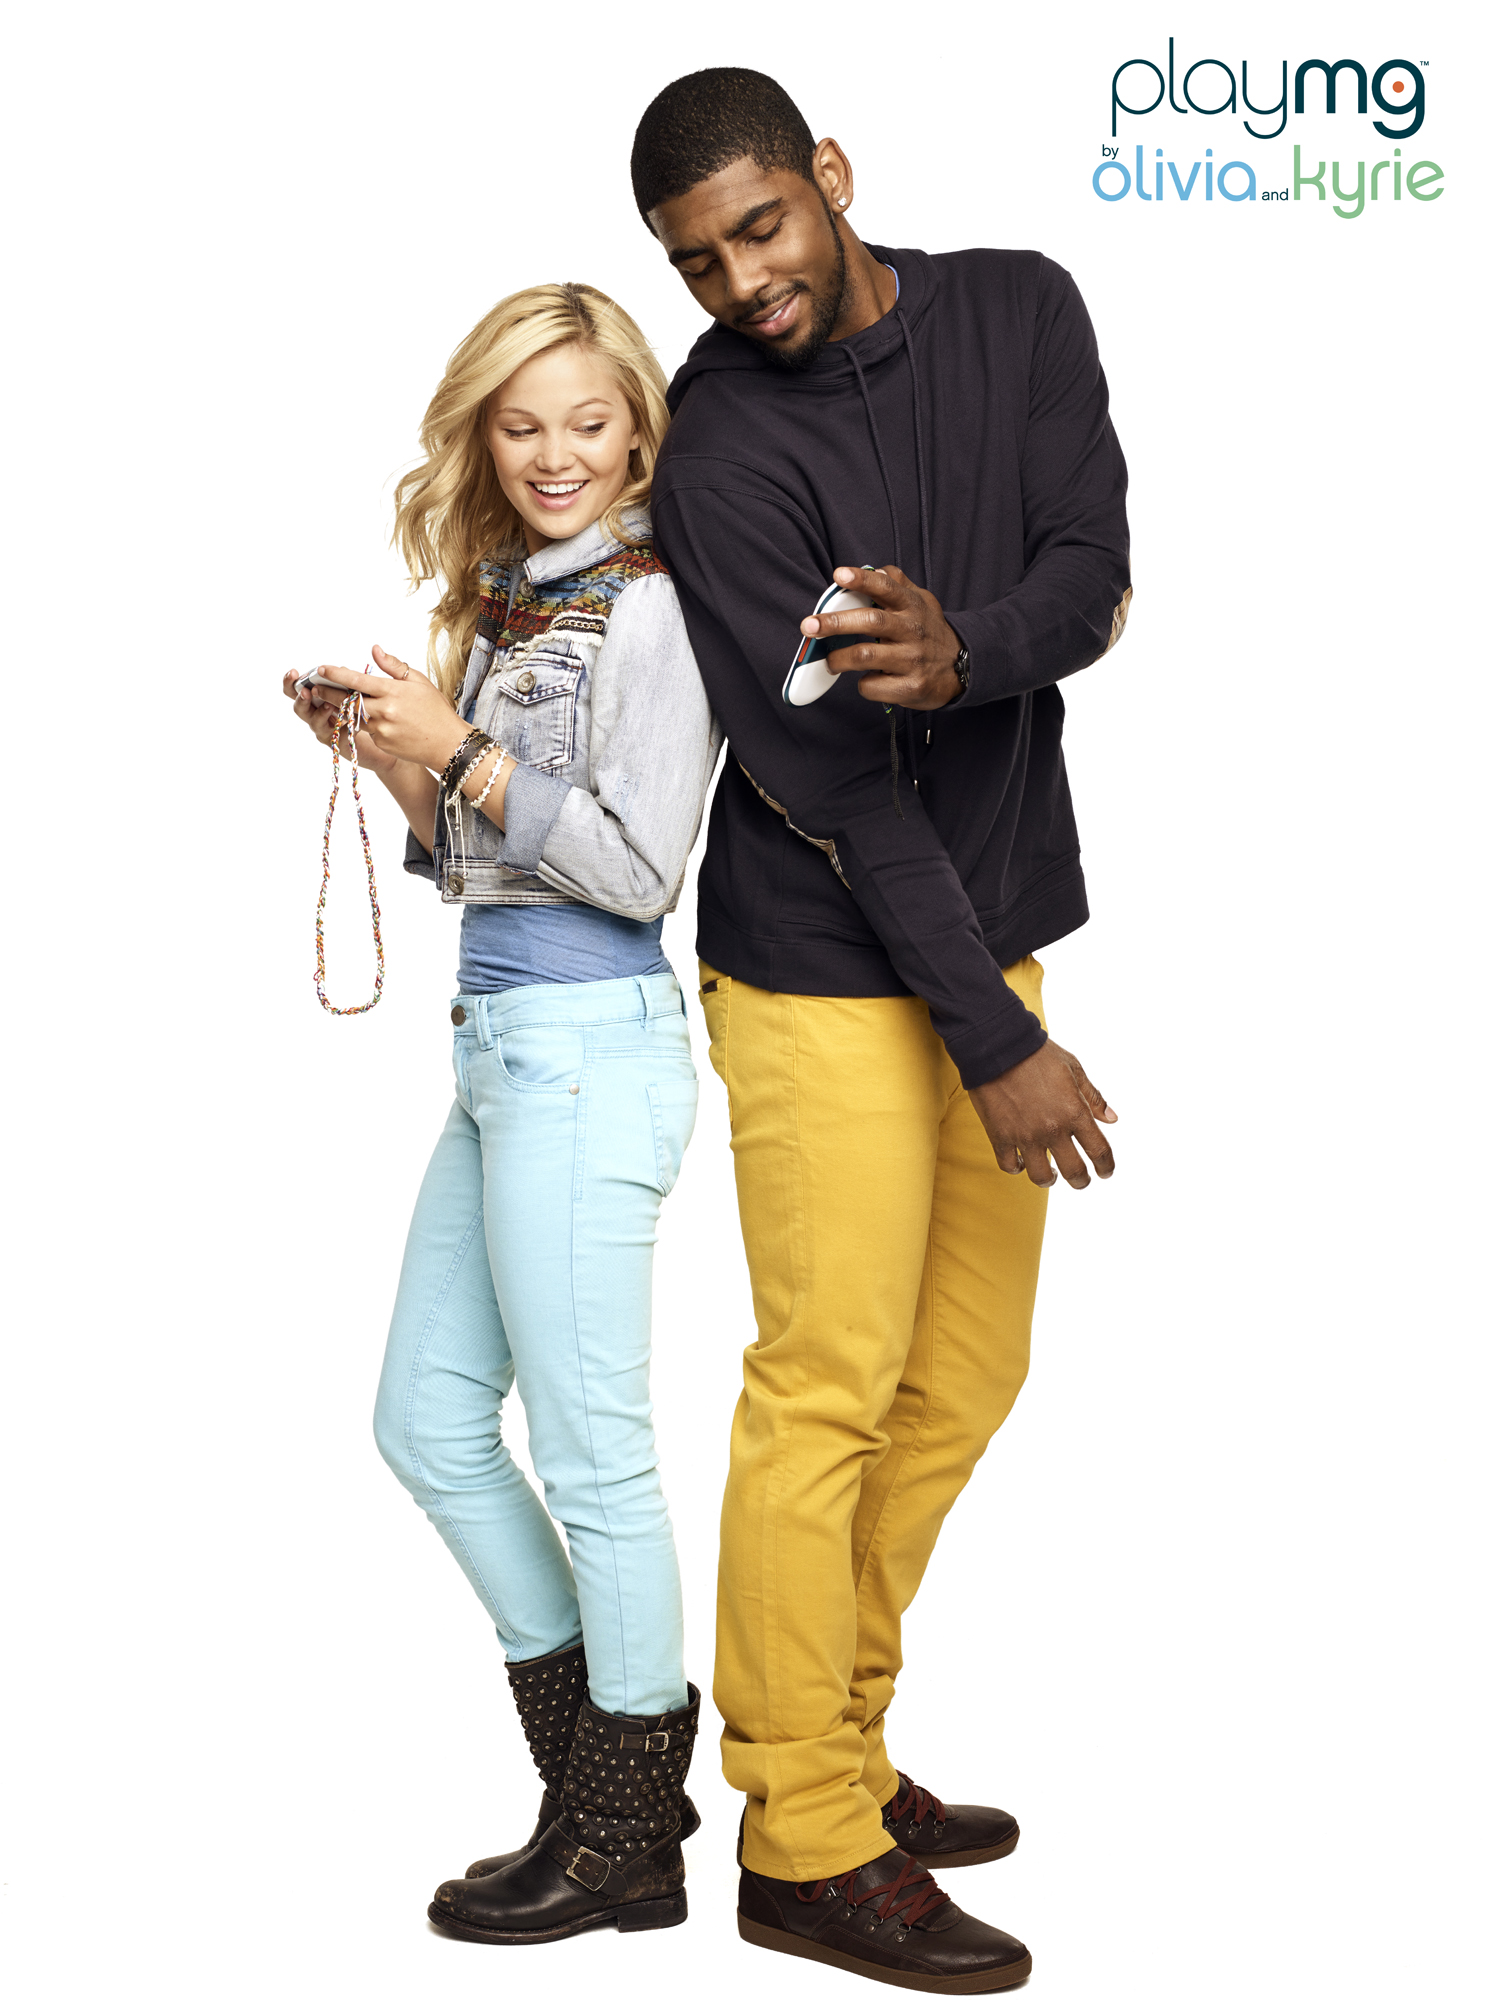 NBA Star Kyrie Irving and Disney actress Olivia Holt partner with PlayMG